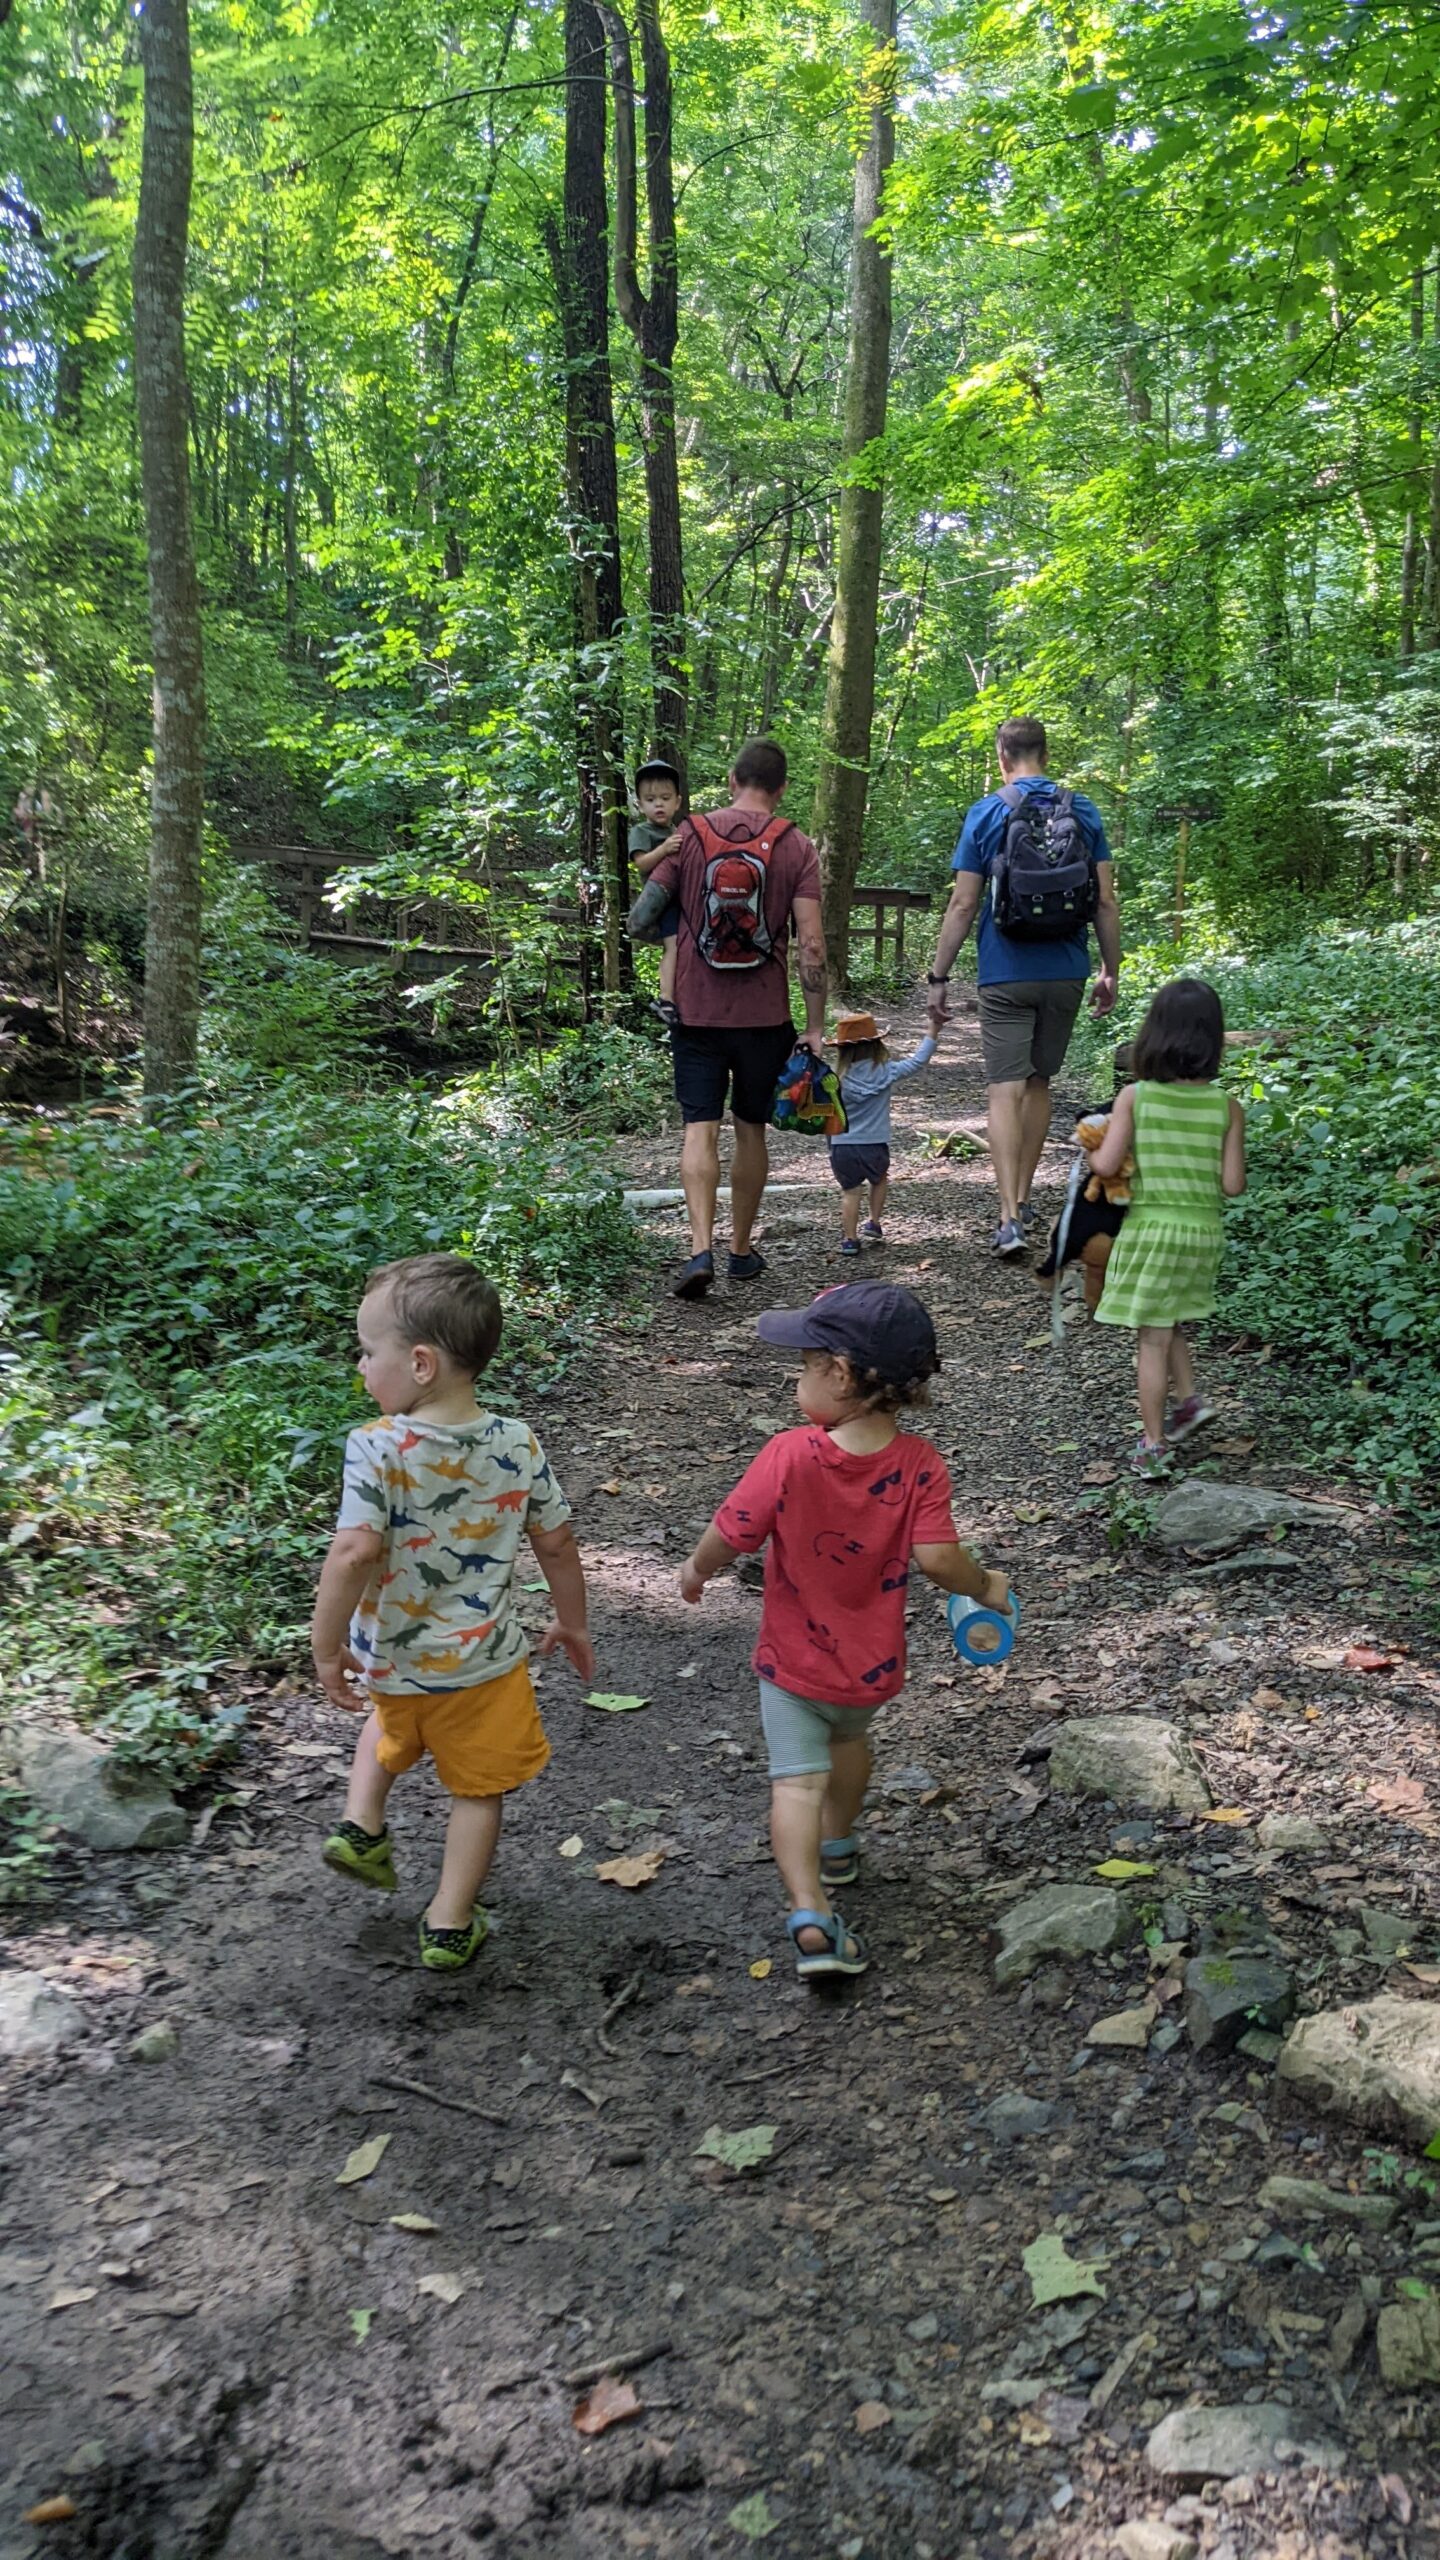 Yong children hiking on a trail in a green forest